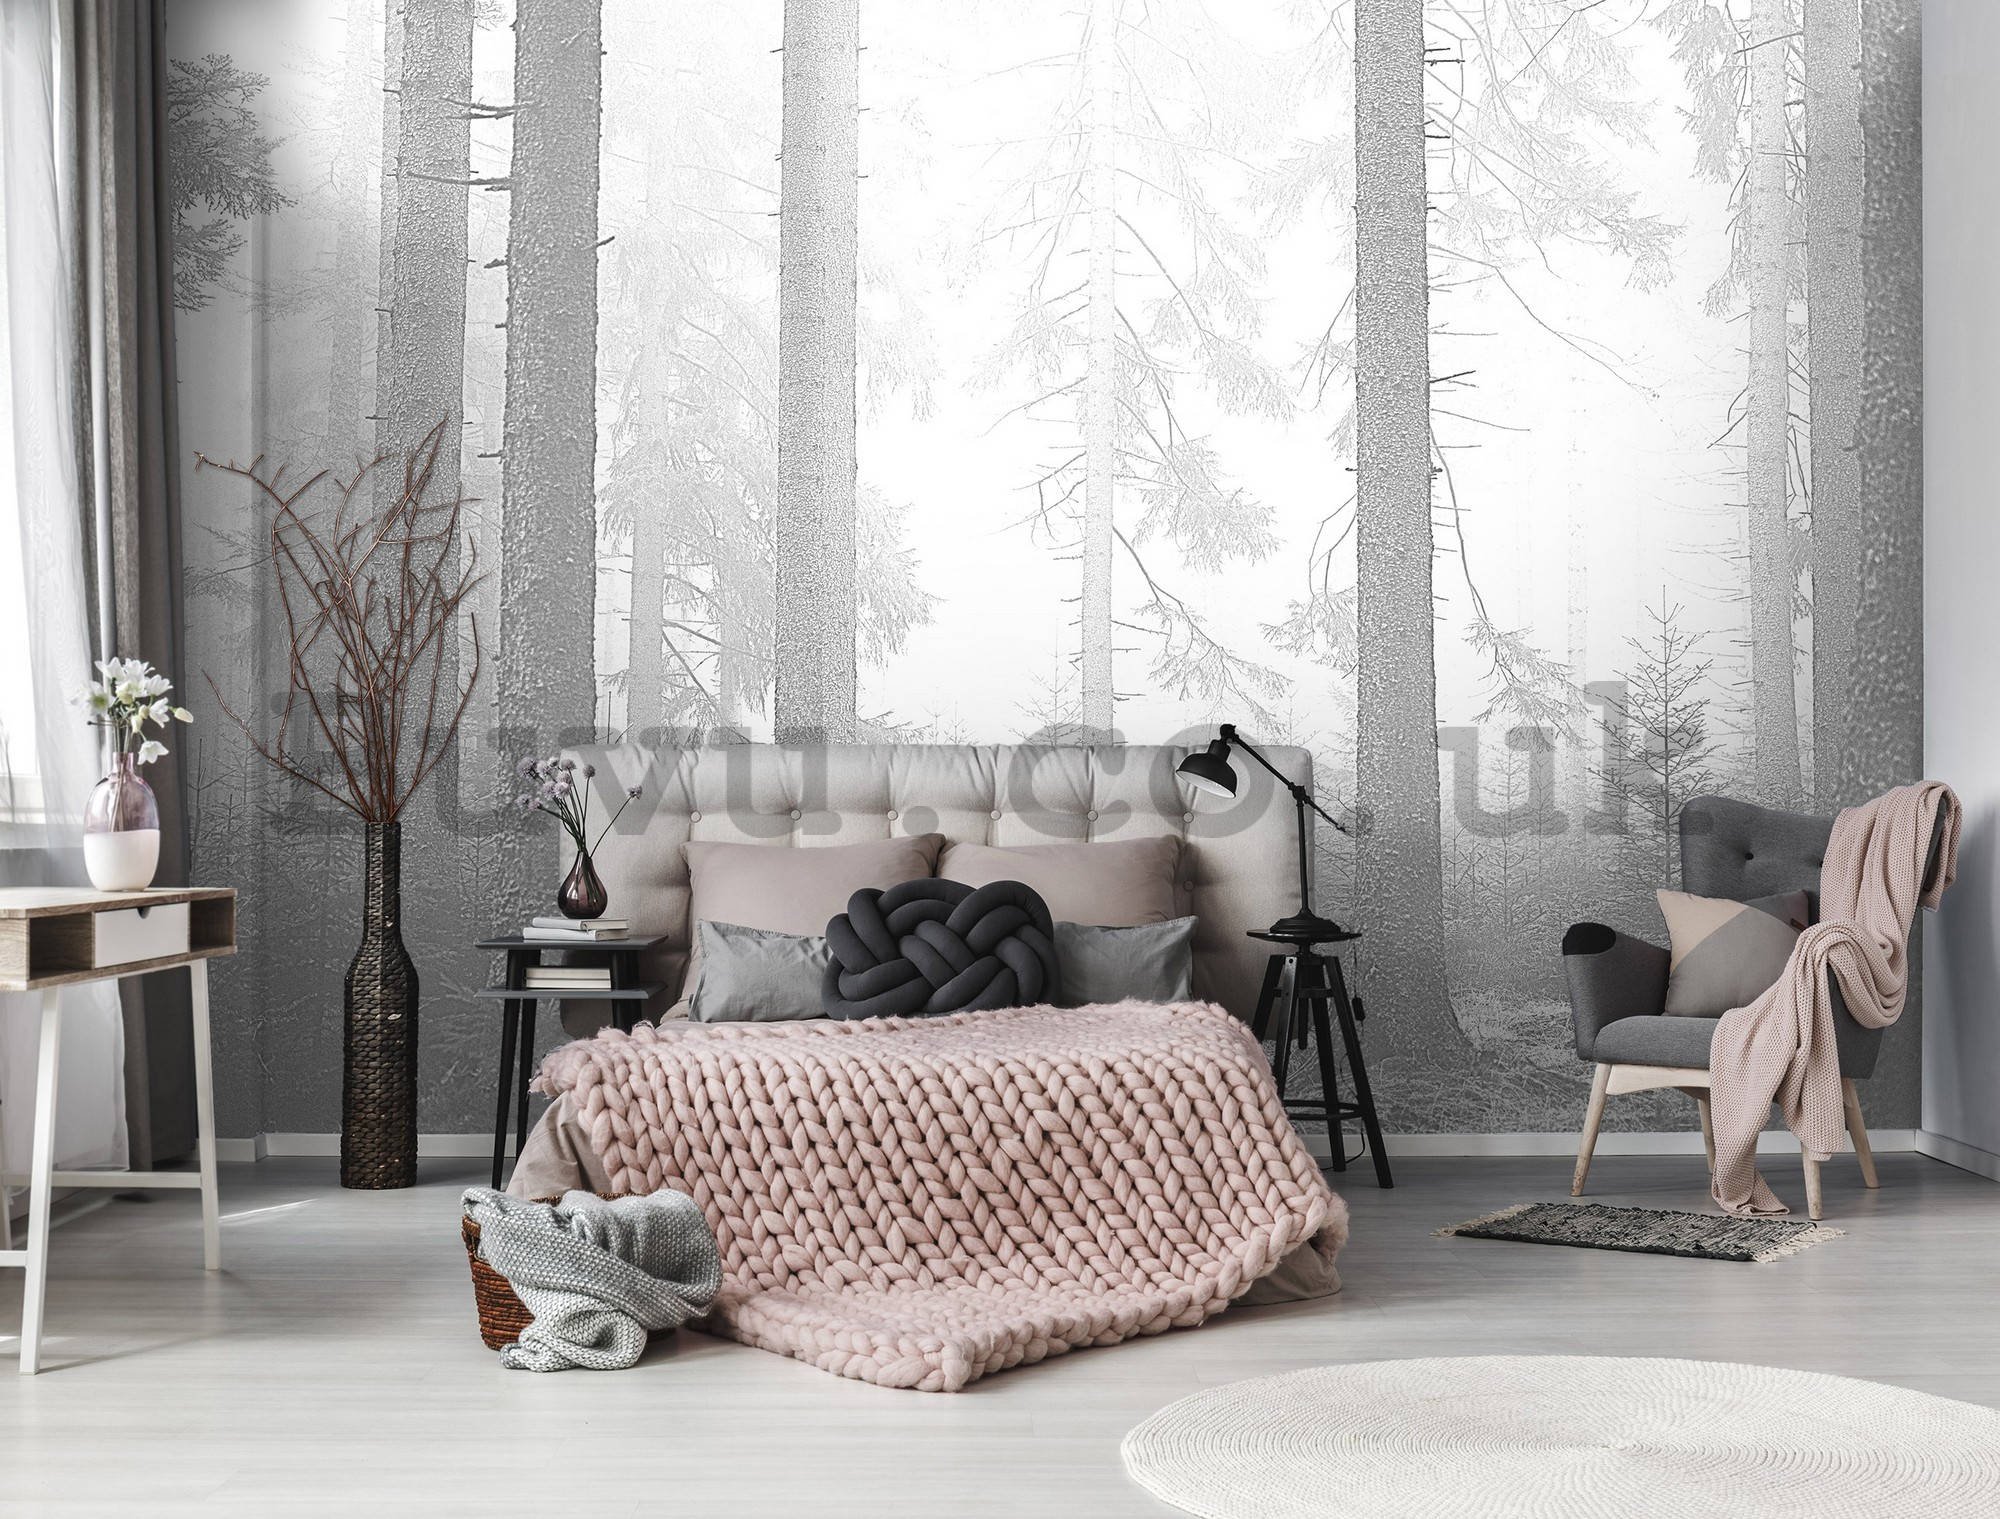 Wall mural vlies: Black and white forest (3) - 152,5x104 cm